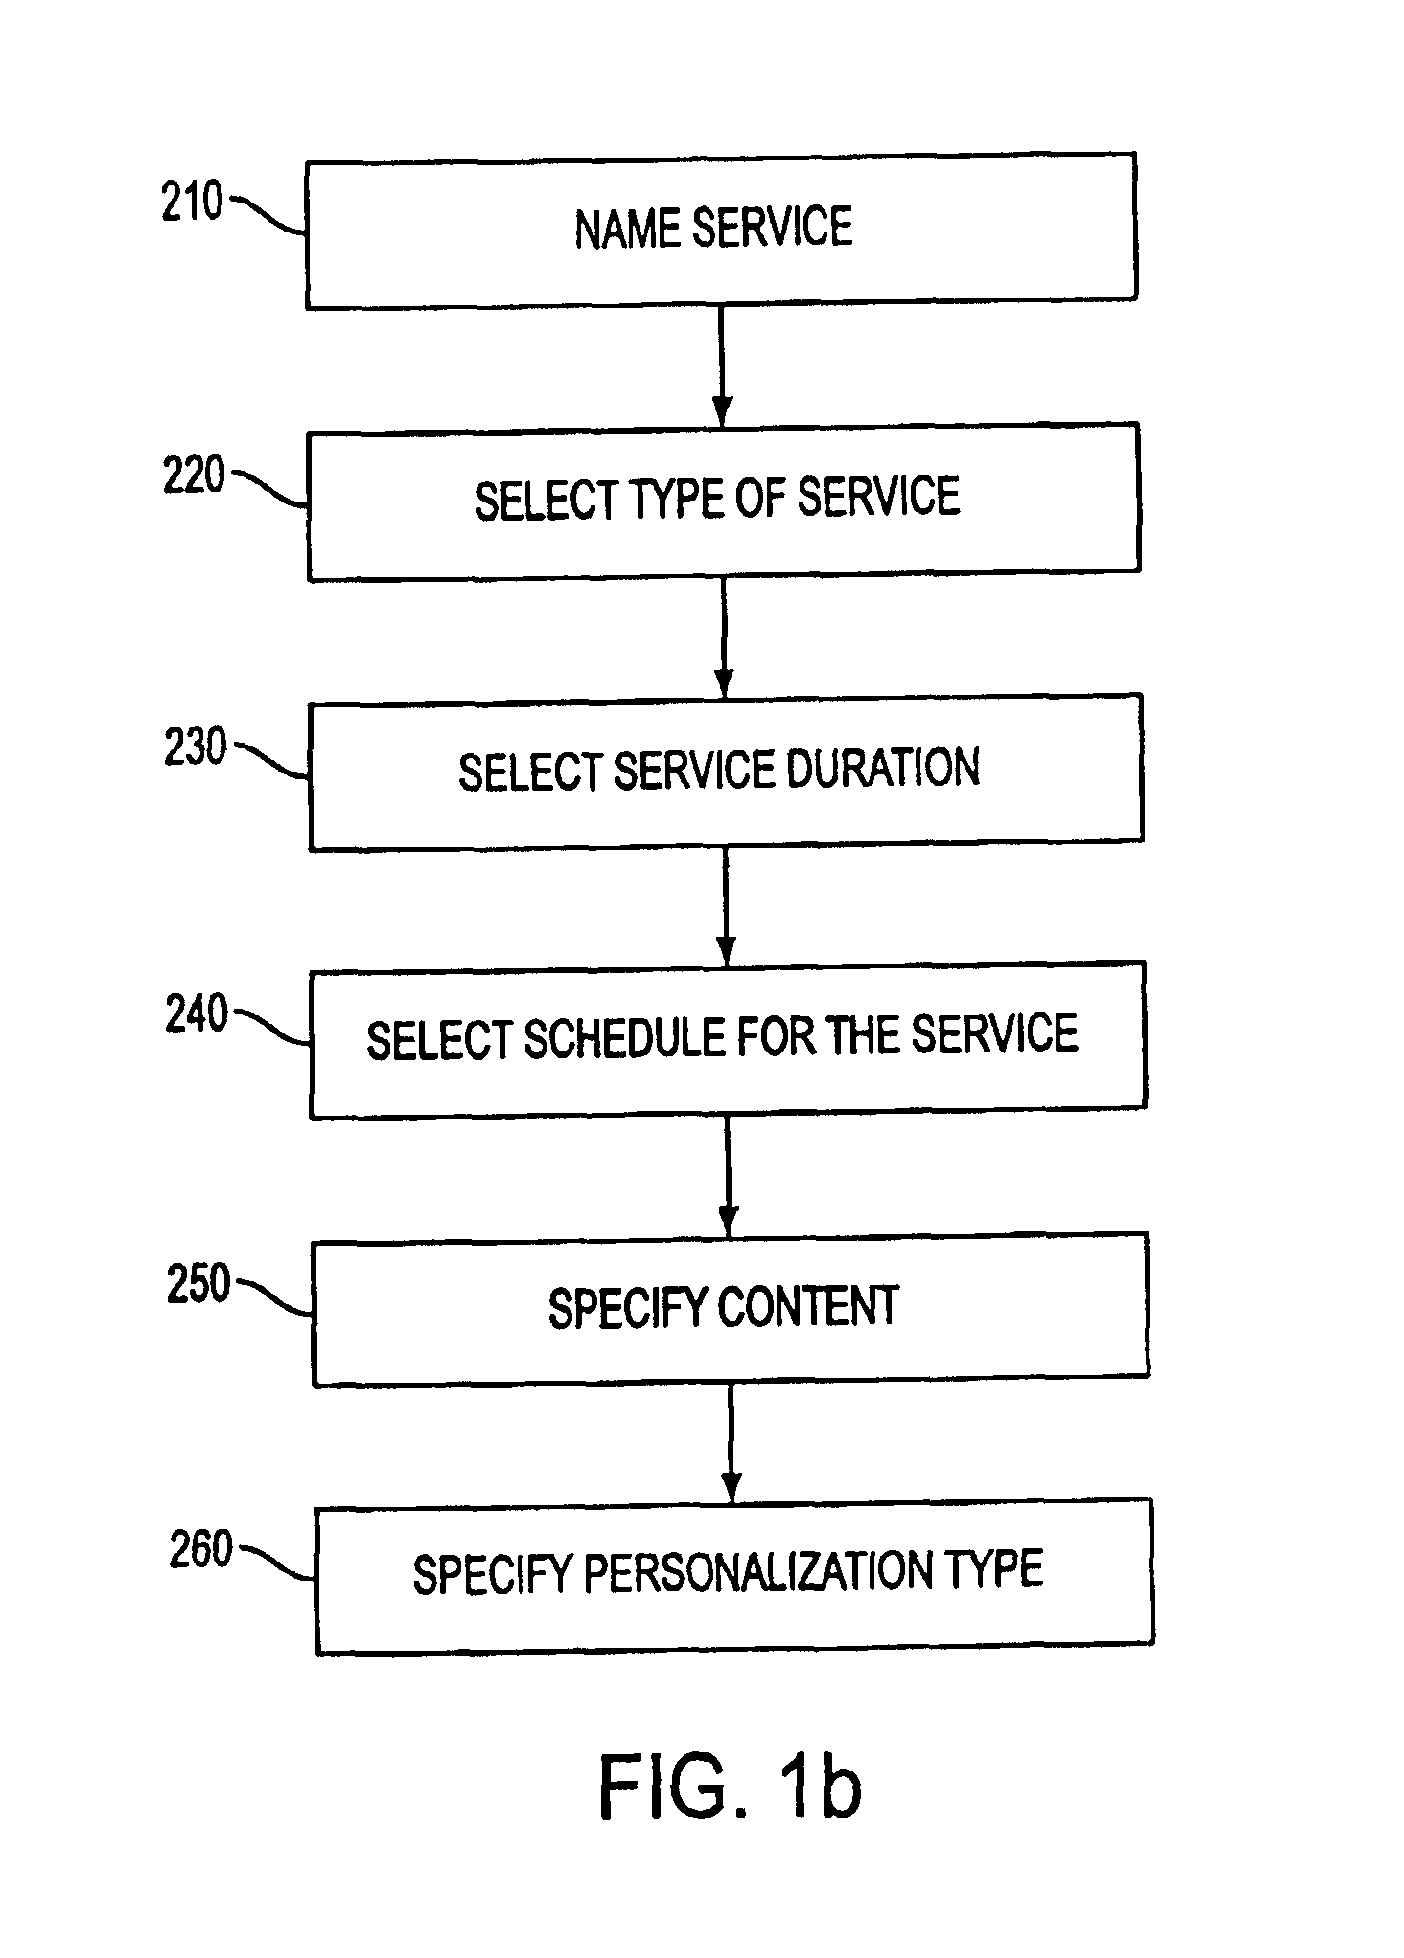 System and method for the creation and automatic deployment of personalized, dynamic and interactive voice services, including deployment through personalized broadcasts